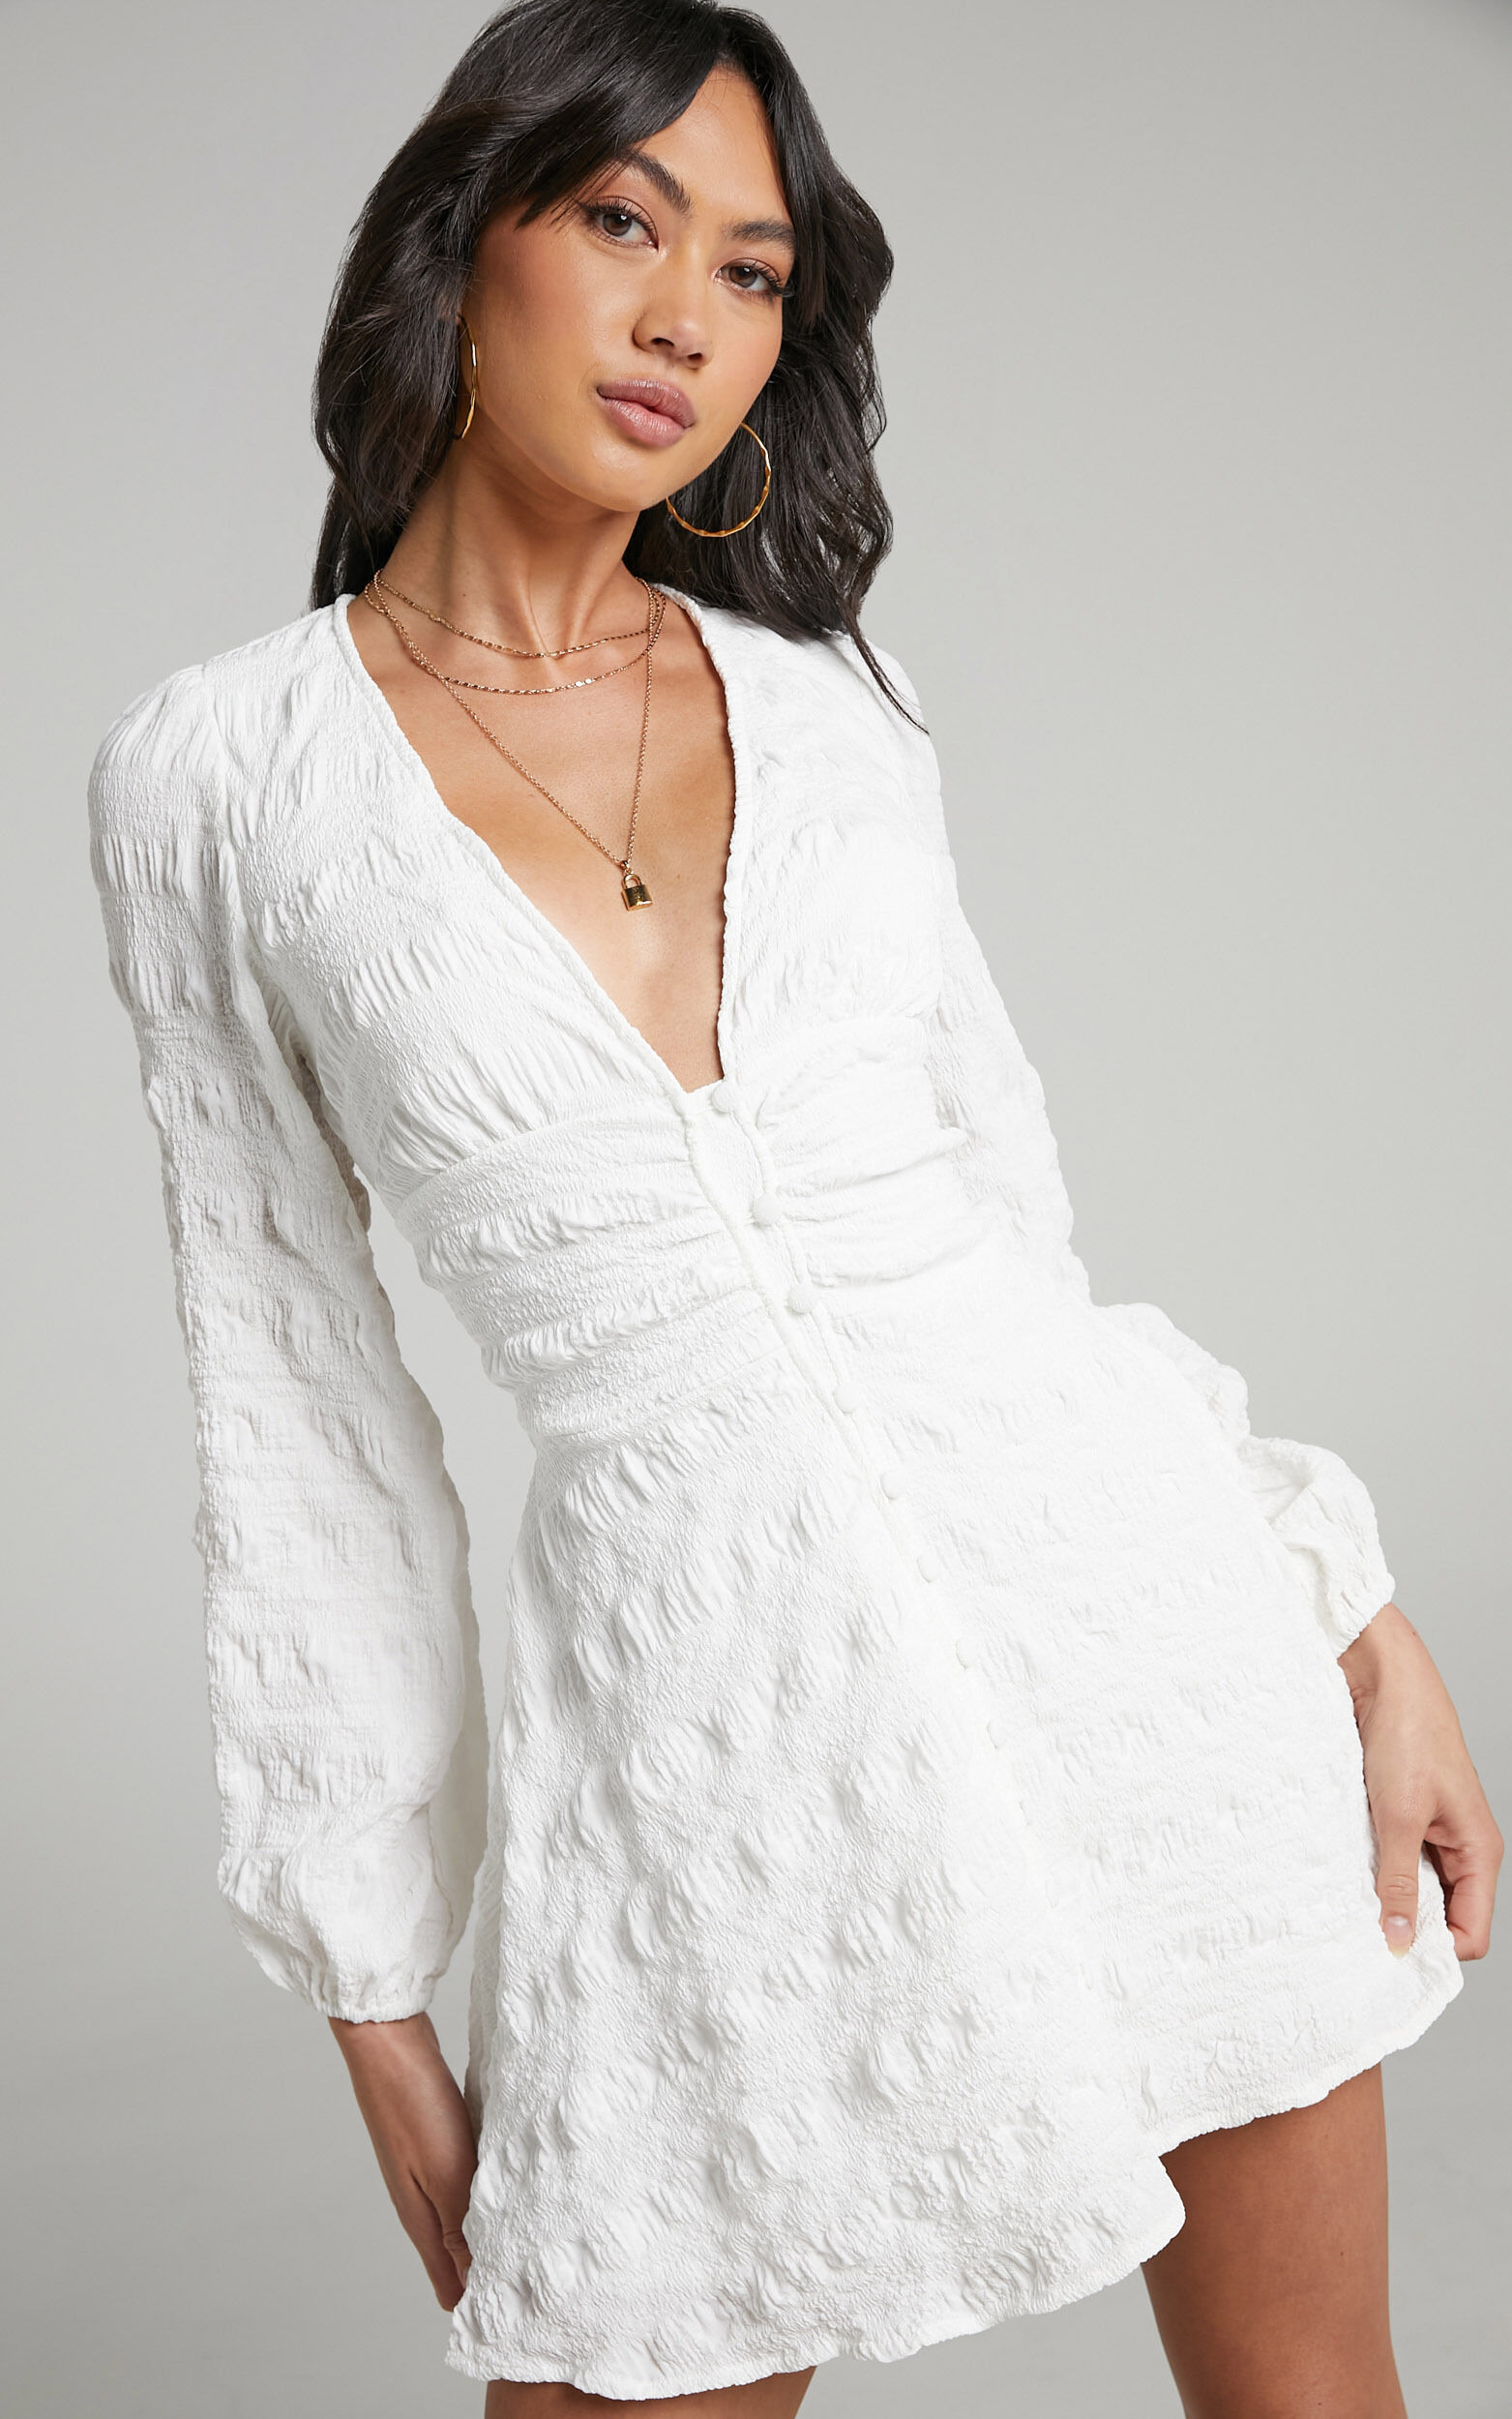 Sanaa Long Sleeve Open Back Mini Dress in White - 04, WHT1, super-hi-res image number null